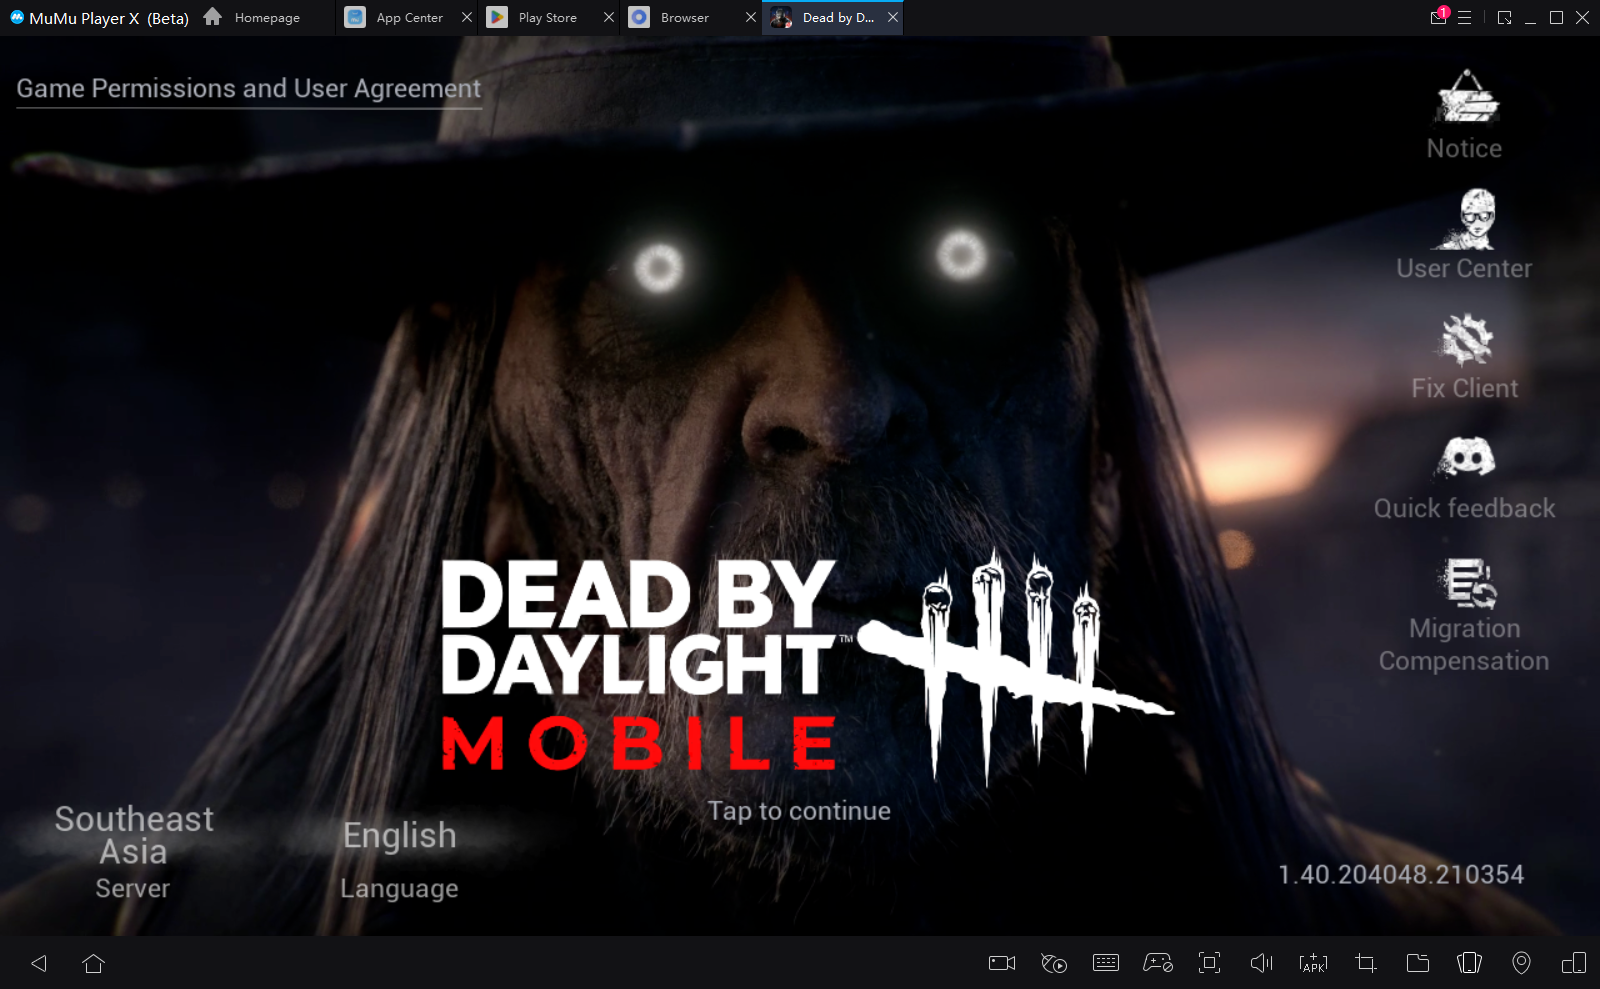 Download and play DeadTubbies Online on PC with MuMu Player